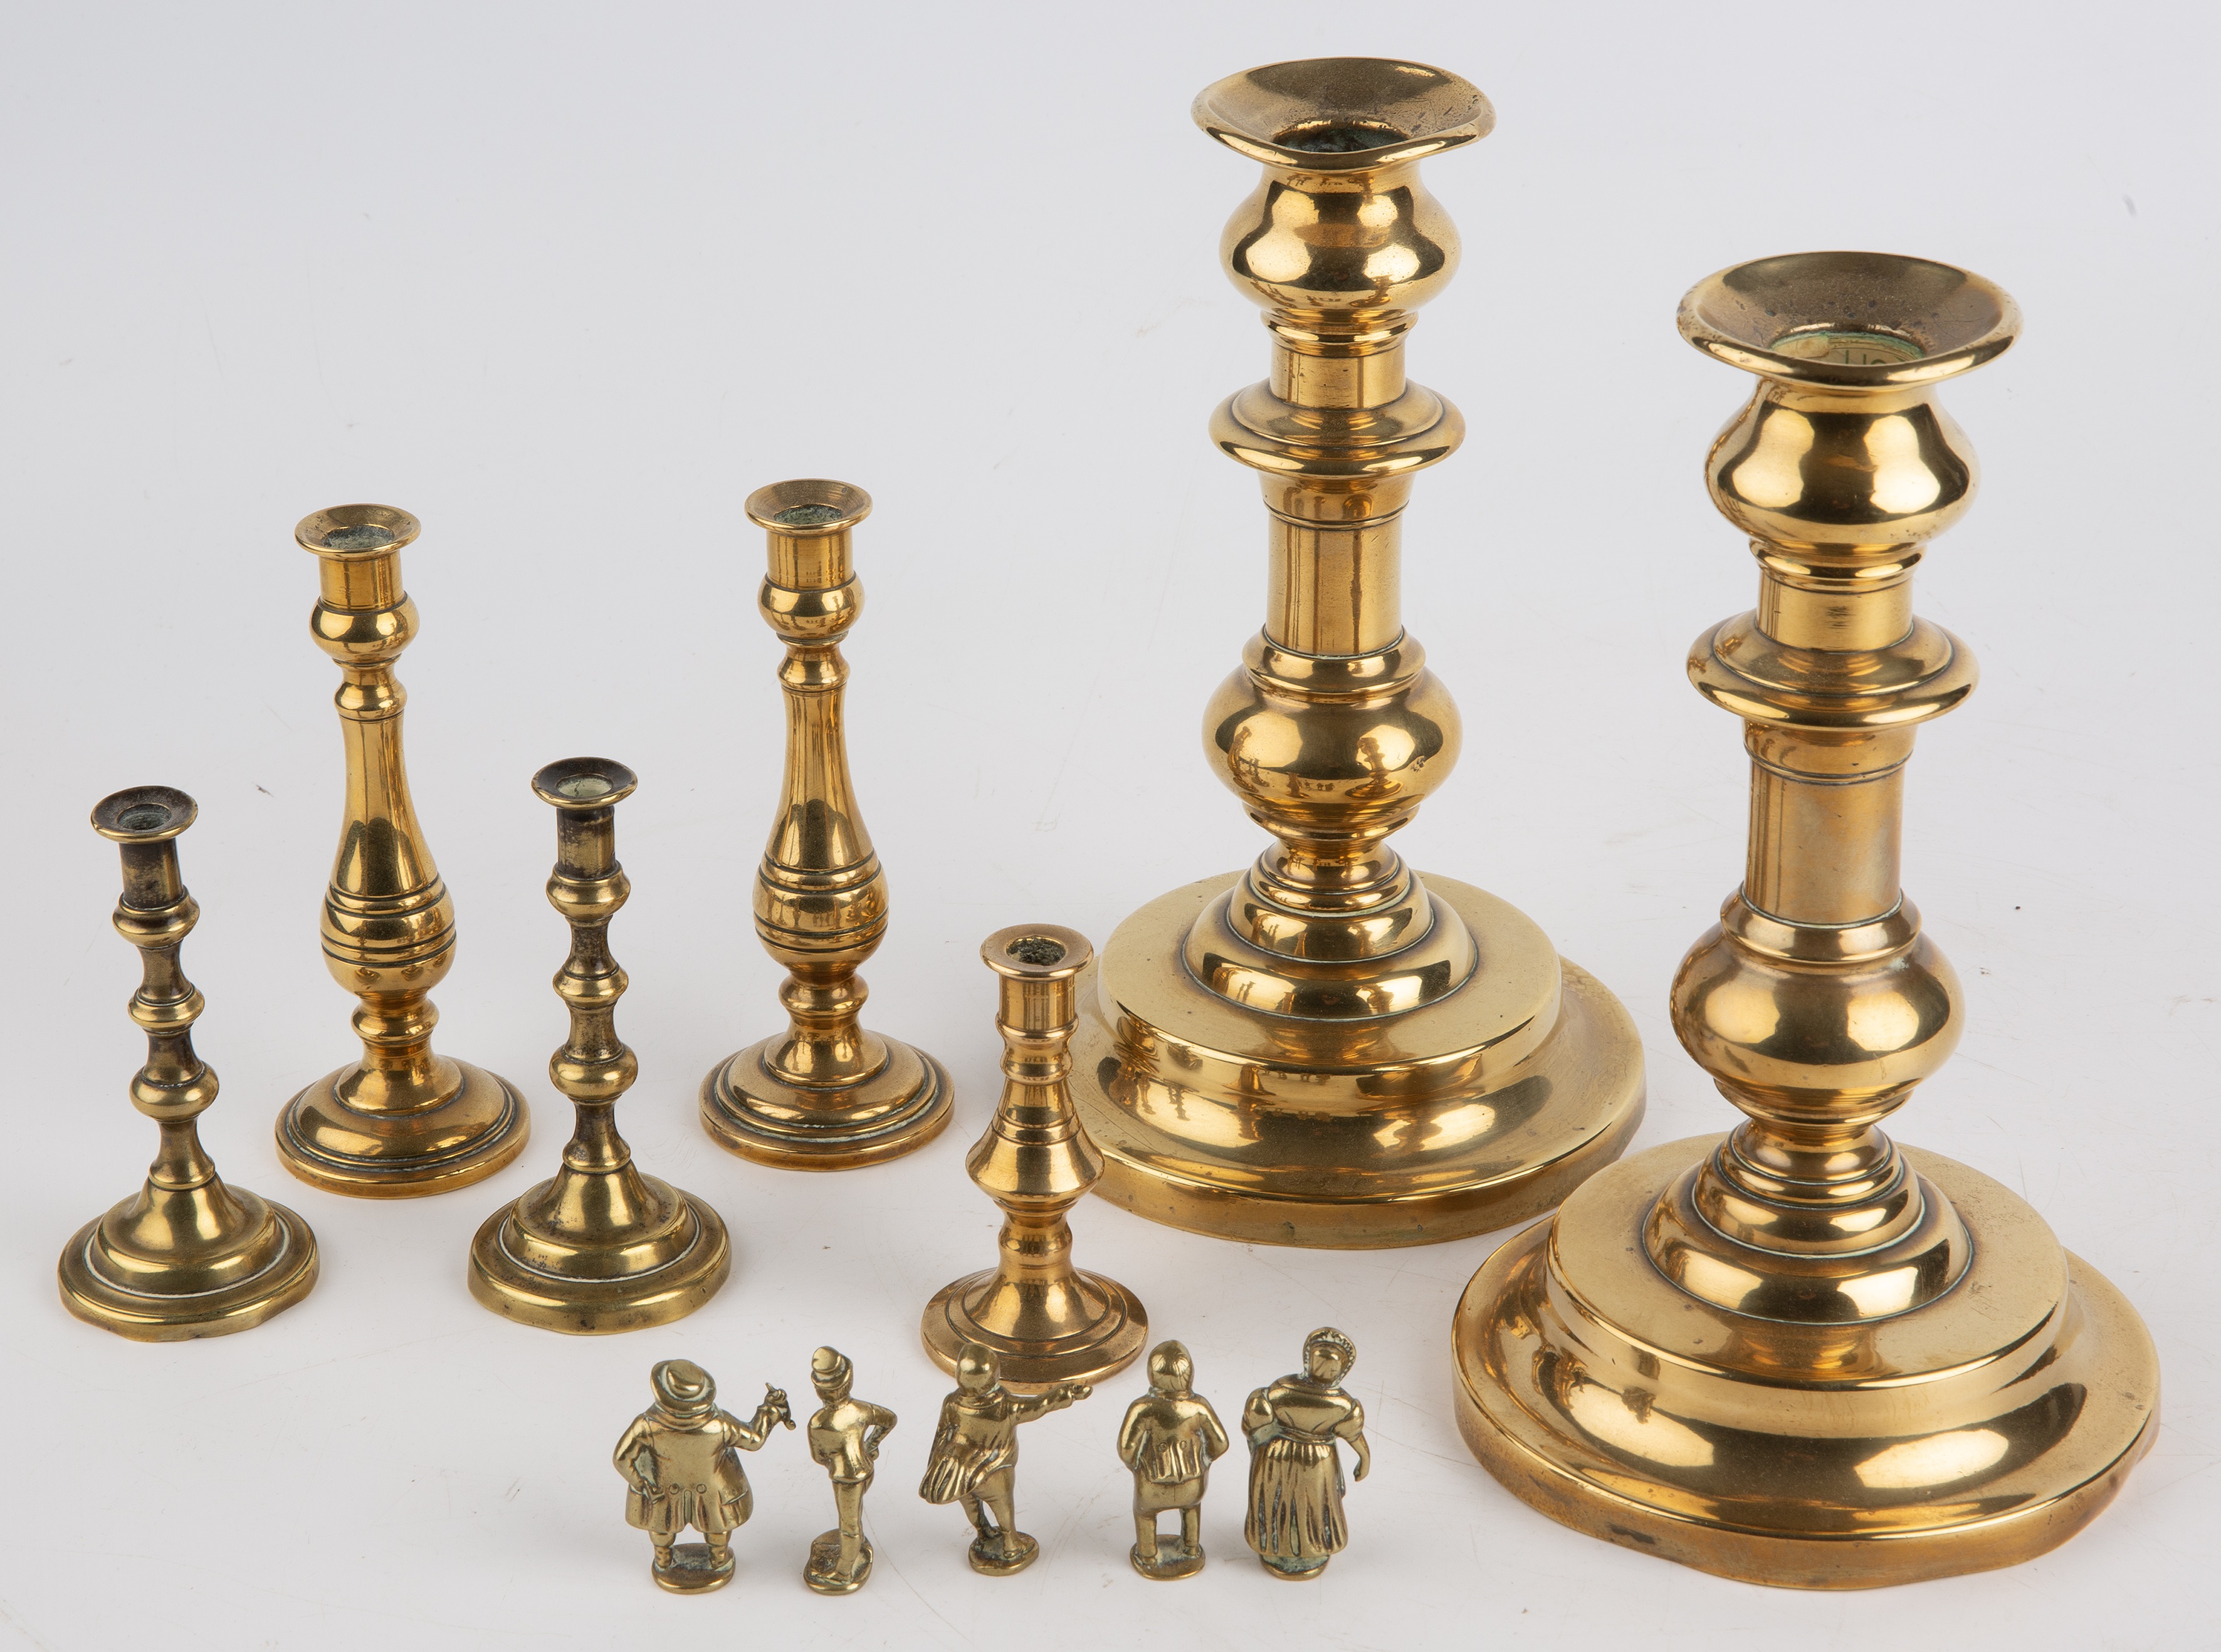 19th century brassware to include candlesticks, tapersticks and small Dickens figures - Image 2 of 4